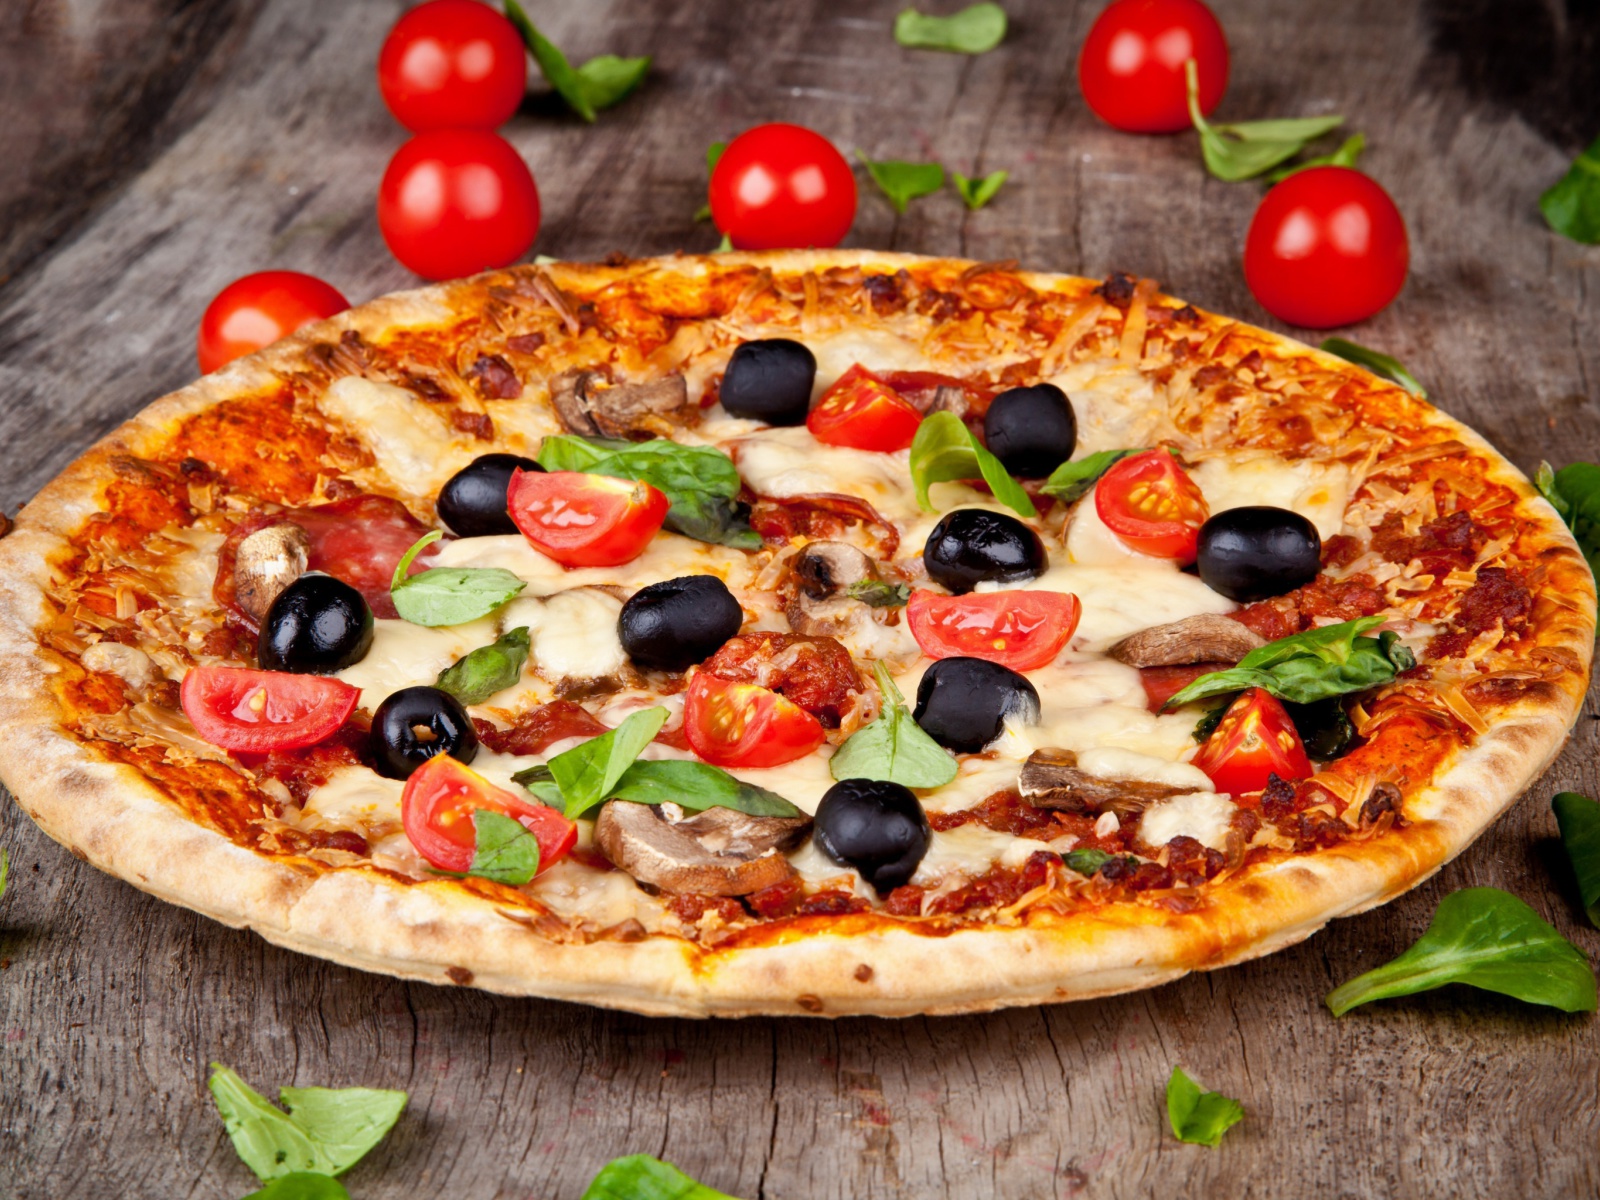 Pizza with tomatoes and olives screenshot #1 1600x1200